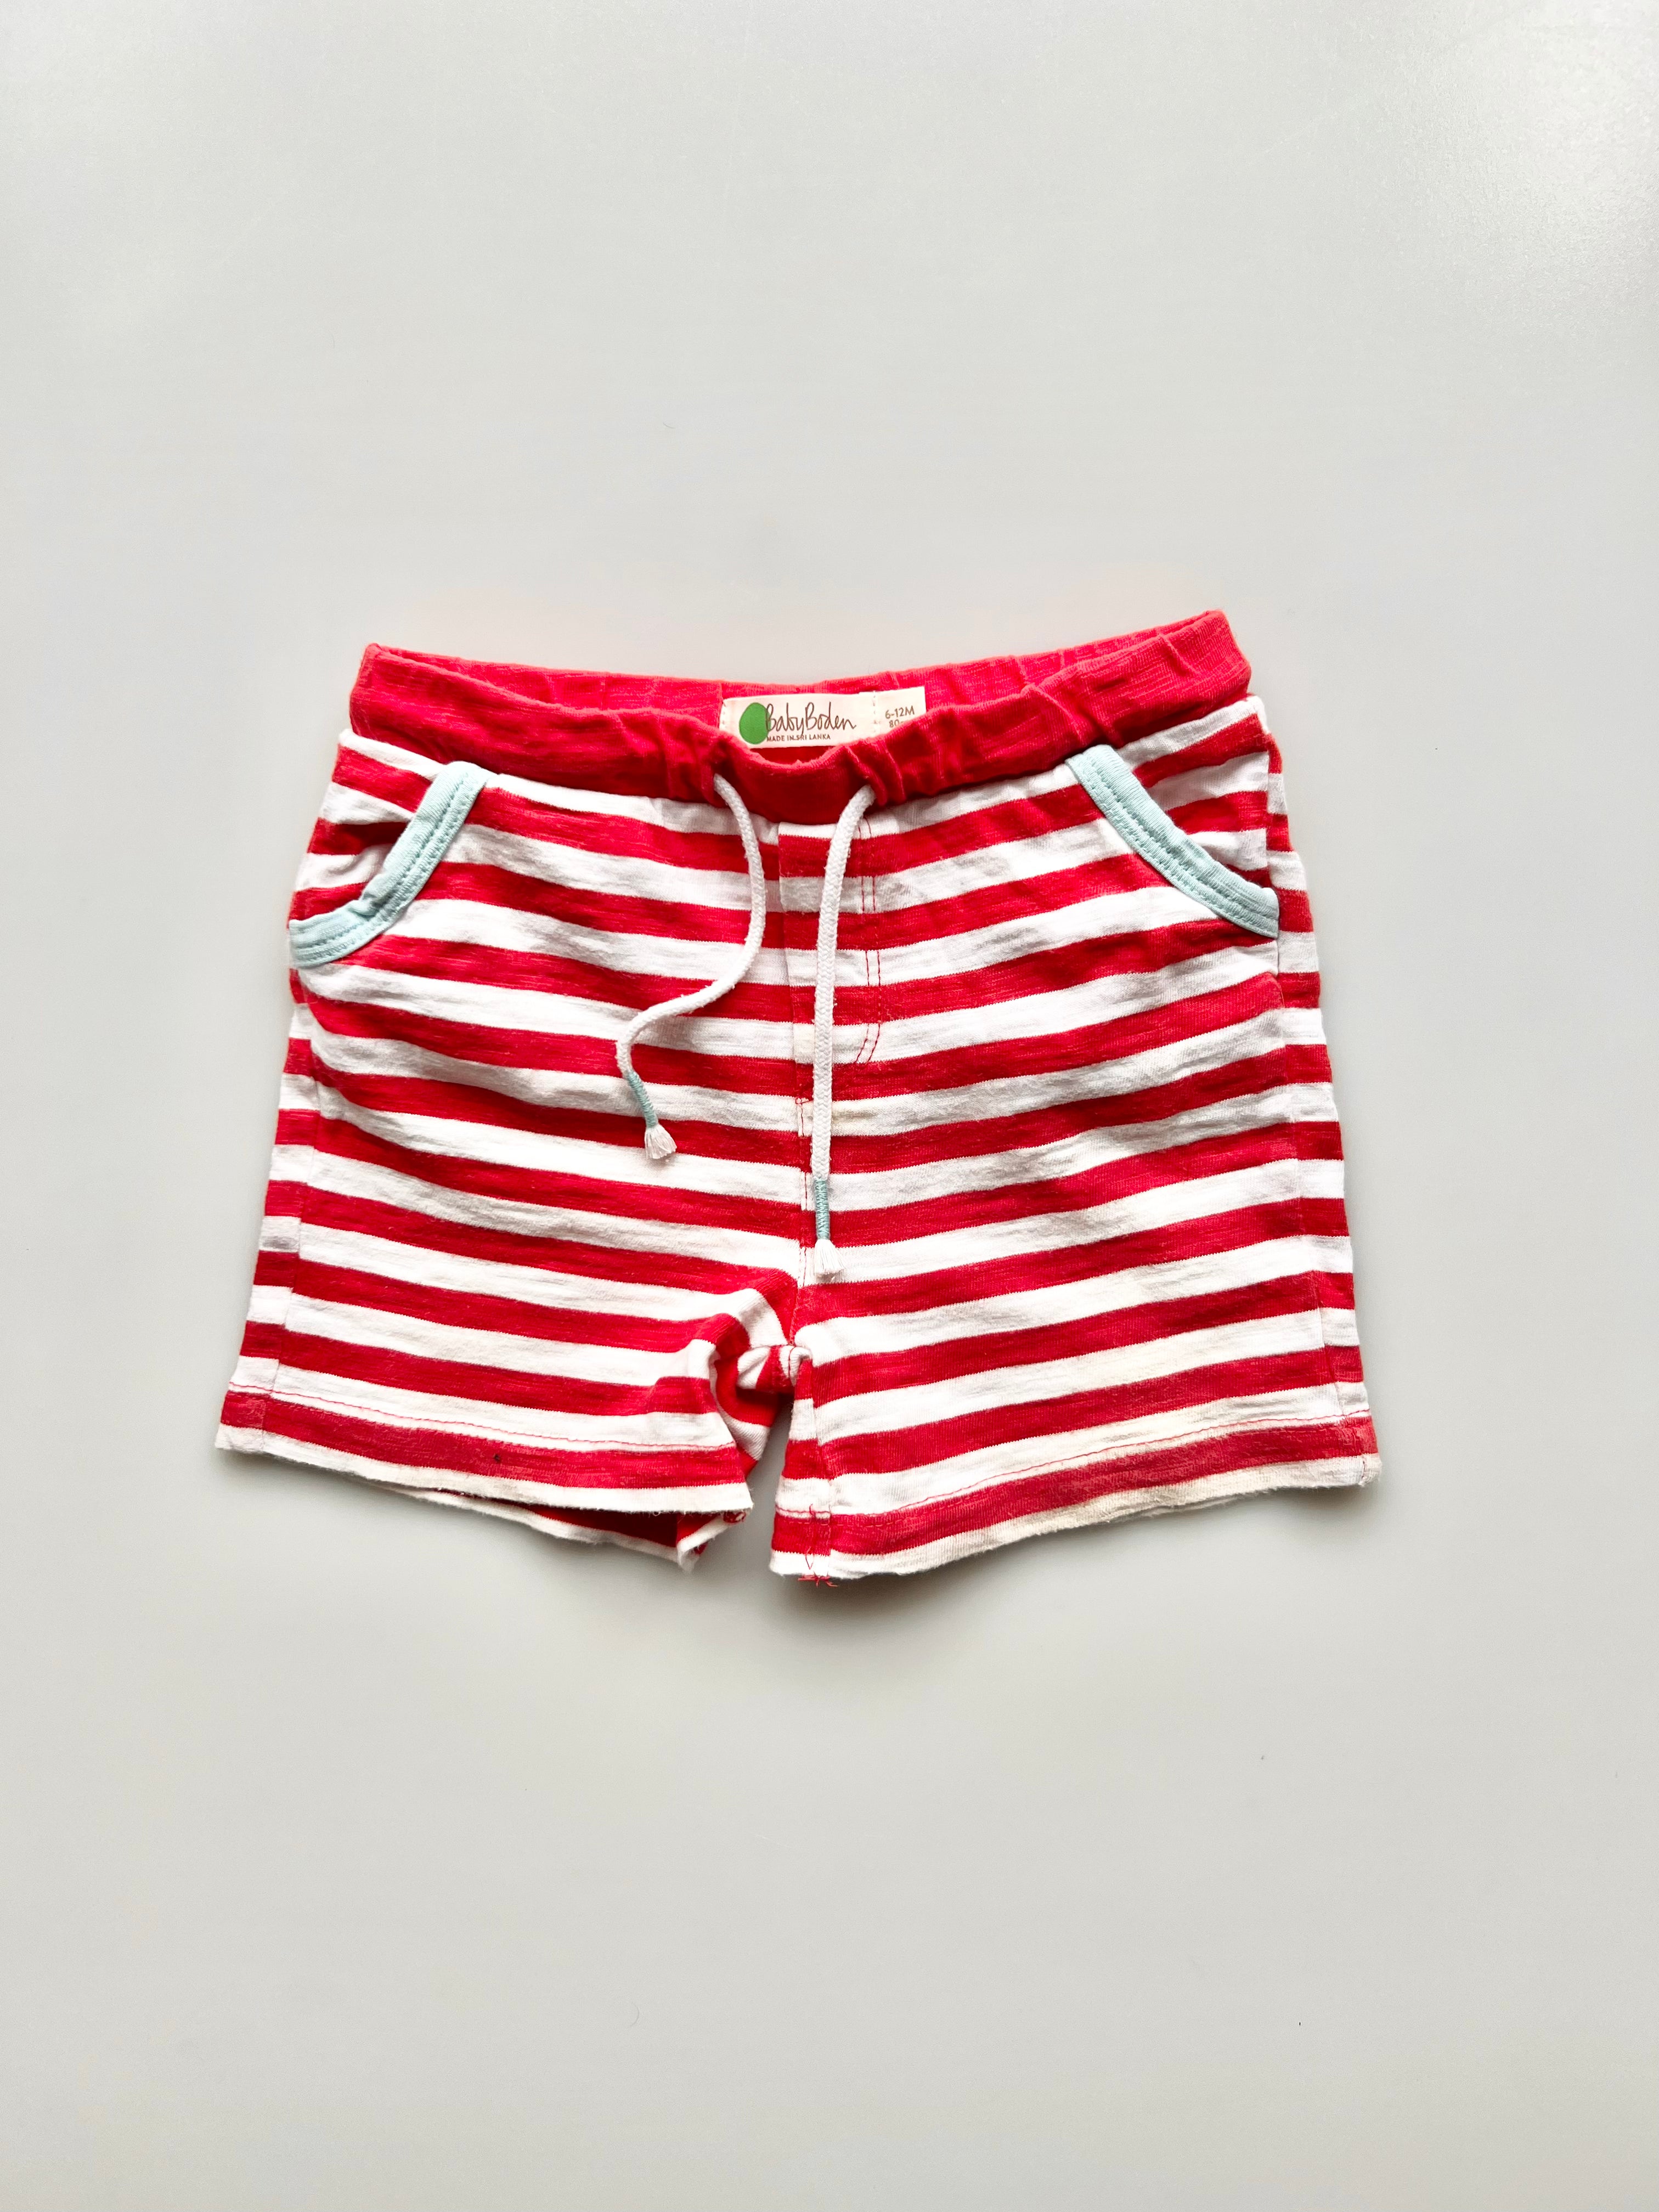 Baby Boden Red Striped Shorts 6-12 Months